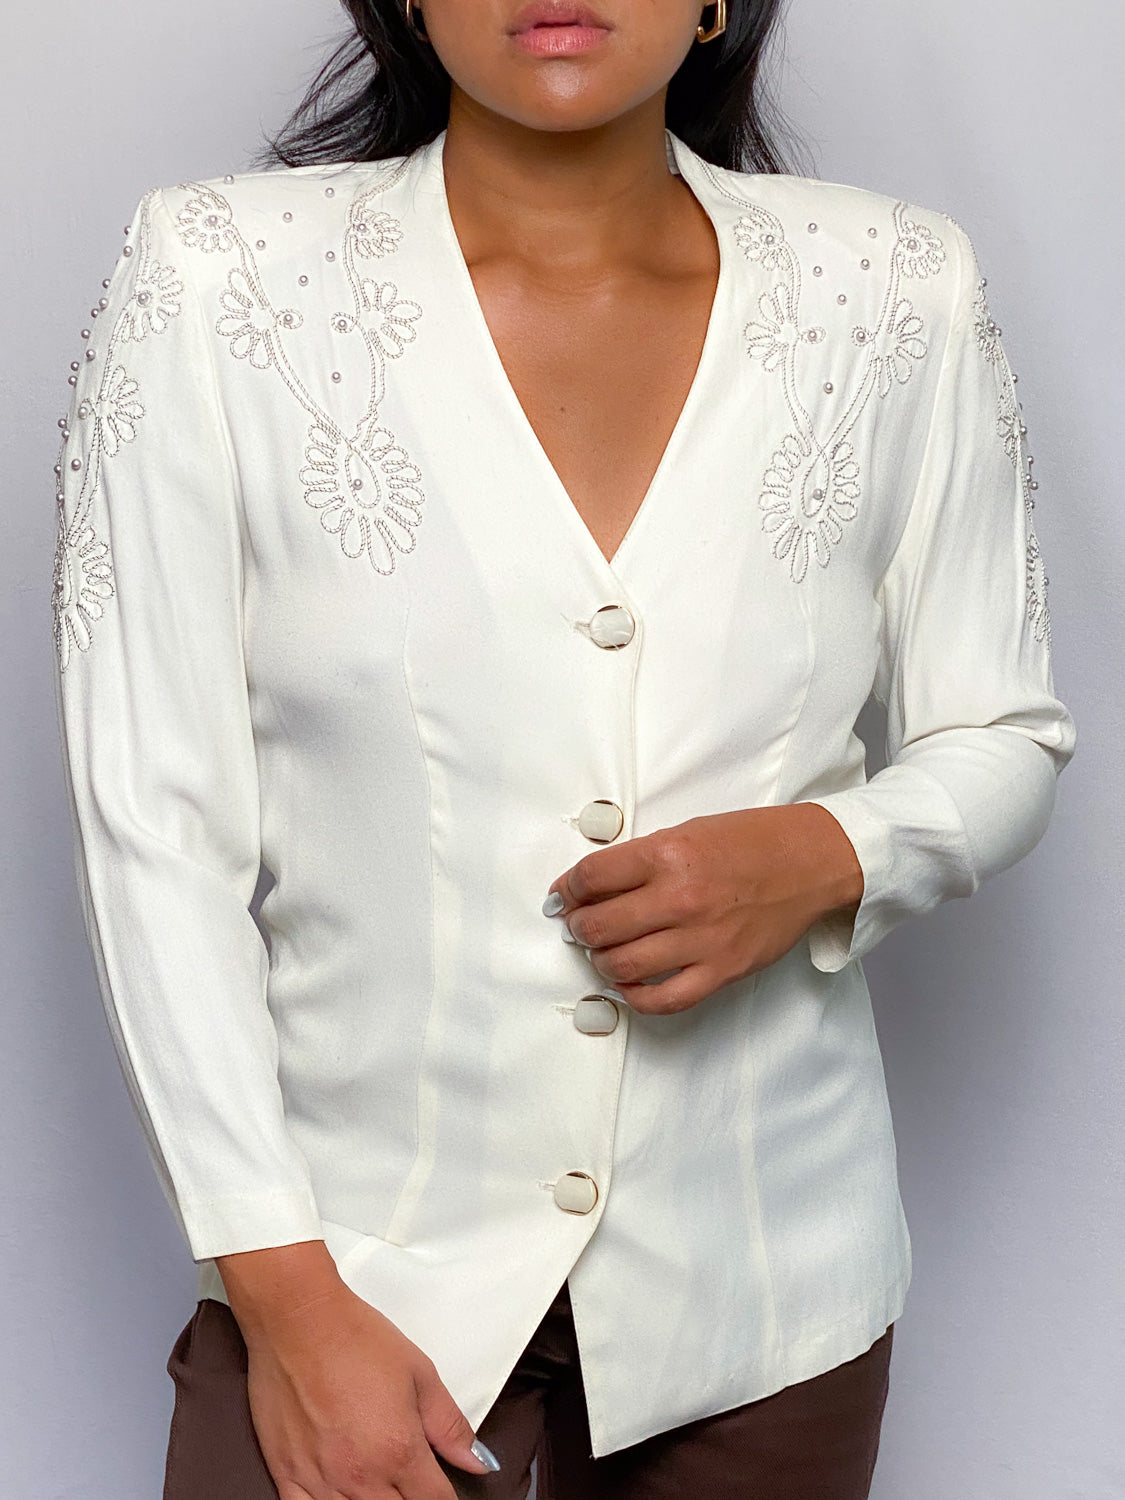 90s White Floral Embroidered and Pearl Blouse